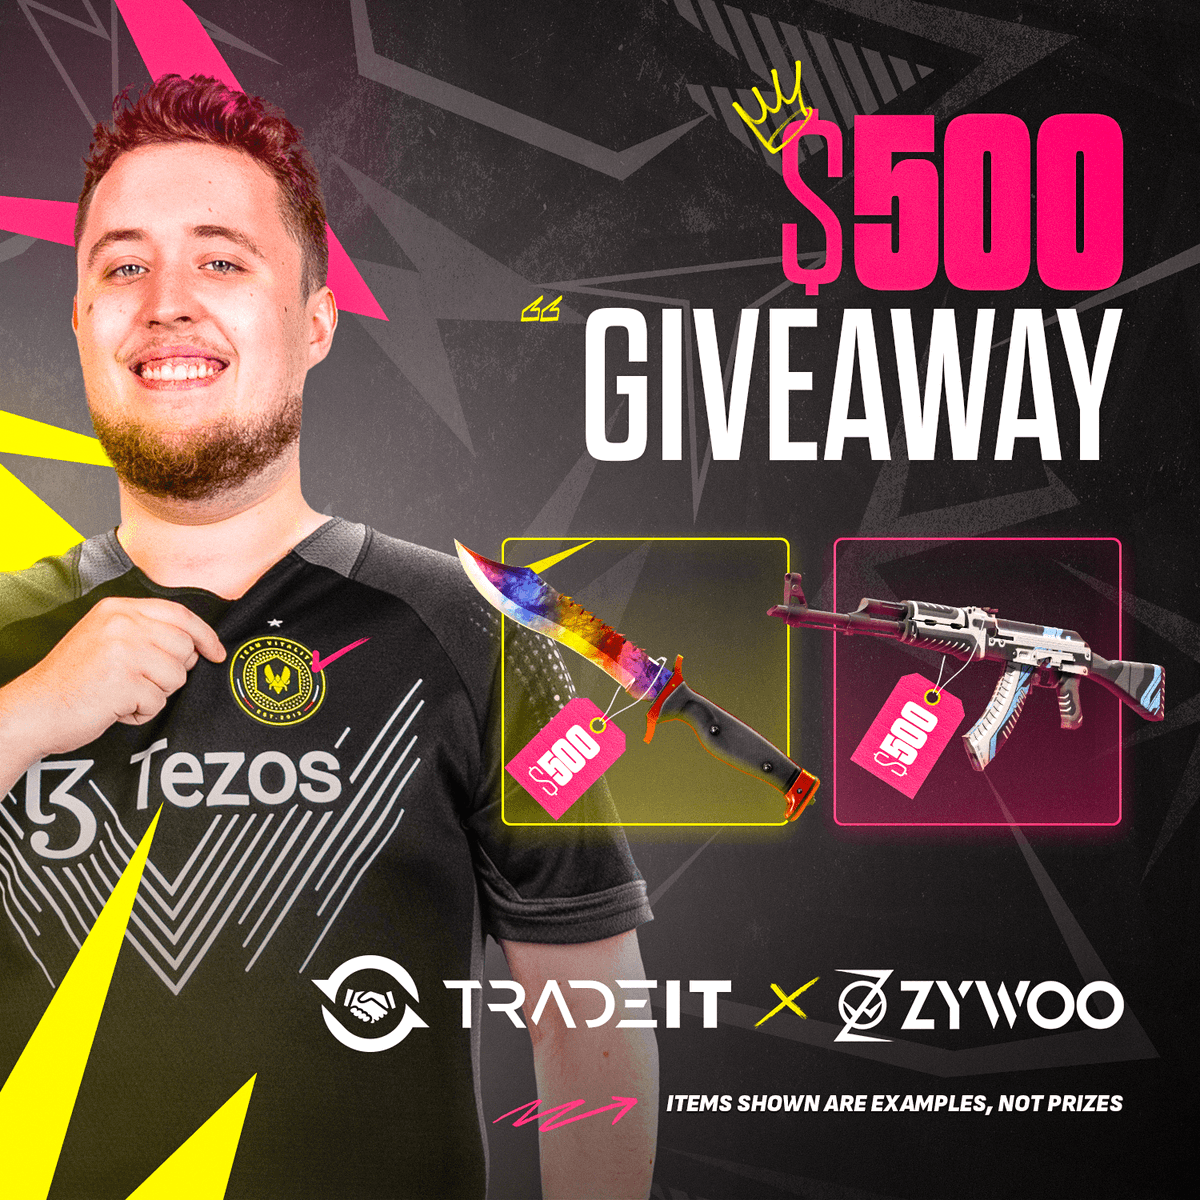 Valentine's giveaway! Together with Tradeit we're giving you the chance to win $500 🎁 To enter, it's easy: - Follow @tradeit_gg & @zywoo - Like, RT and tag a friend Ends in 10 days, good luck! (commercial collaboration)